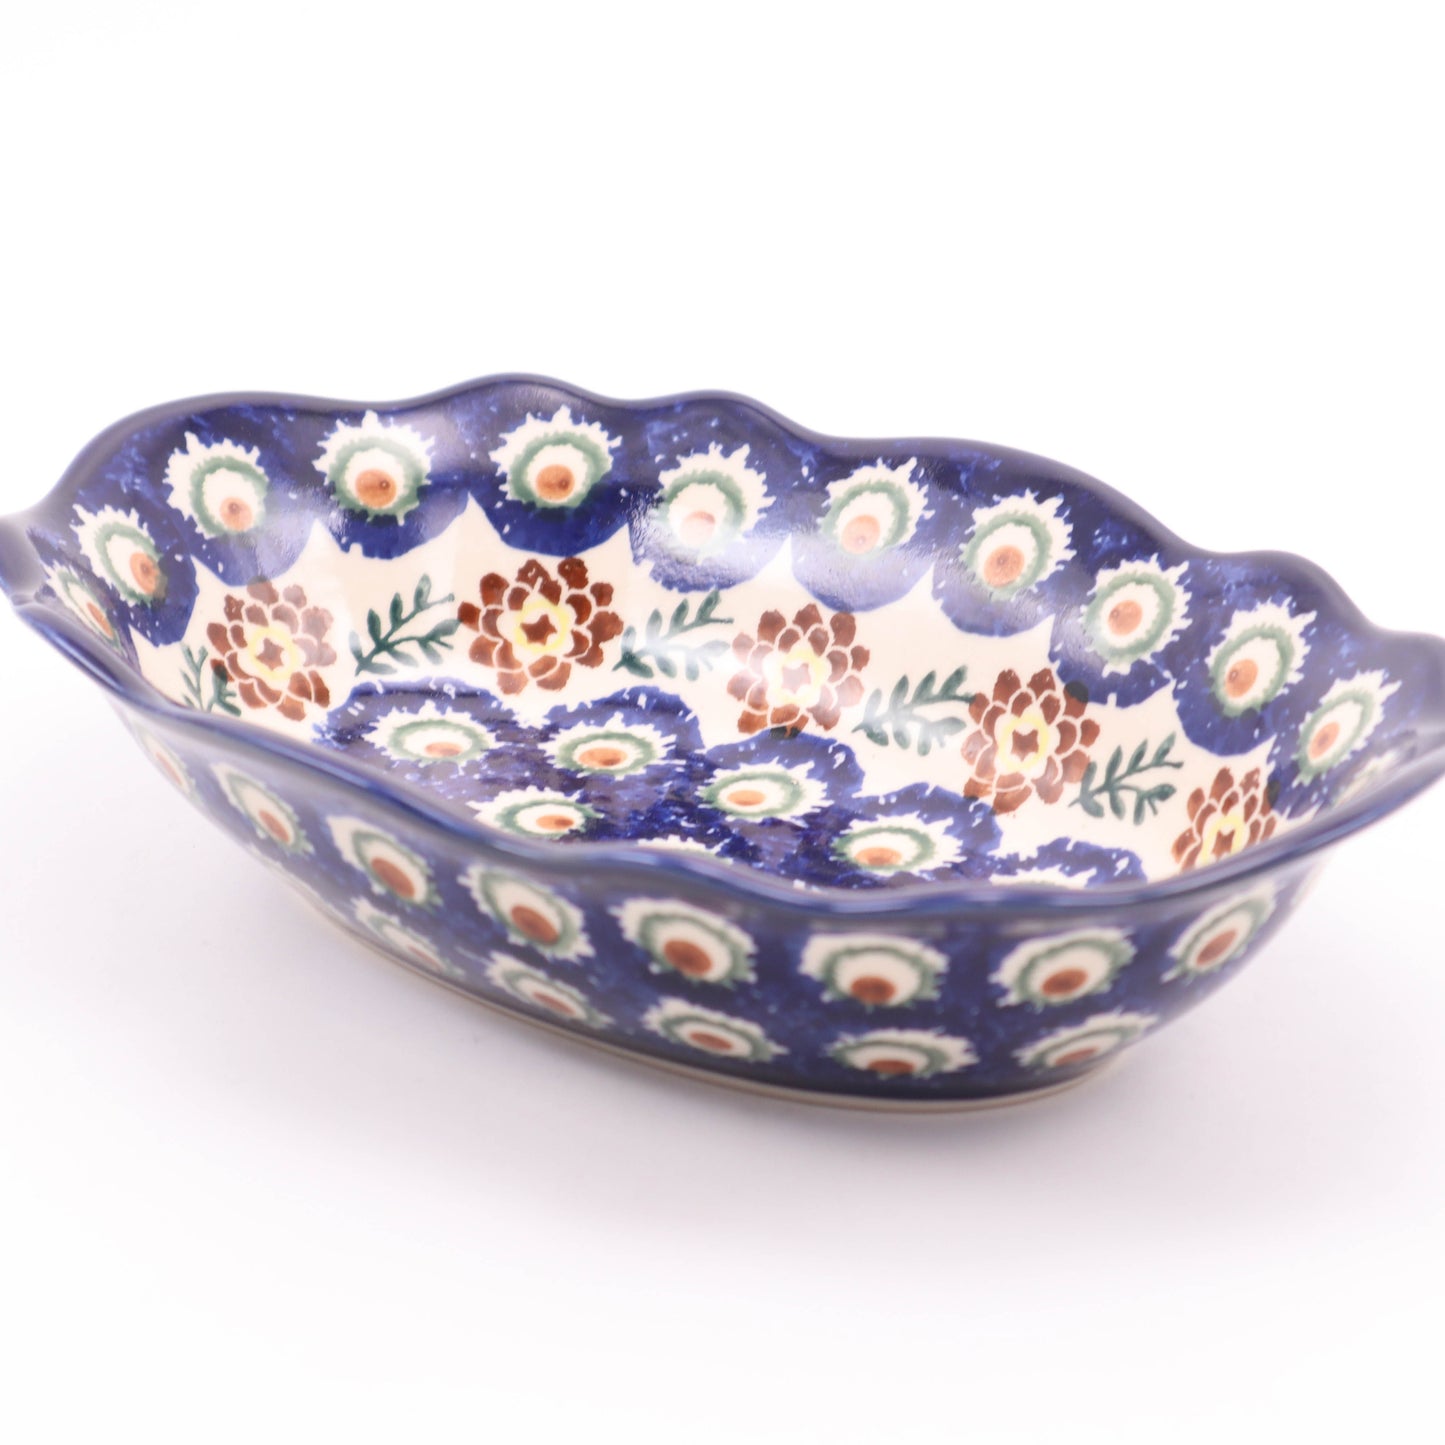 10"x7" Waved Oval Bowl. Pattern: Floral Peacock